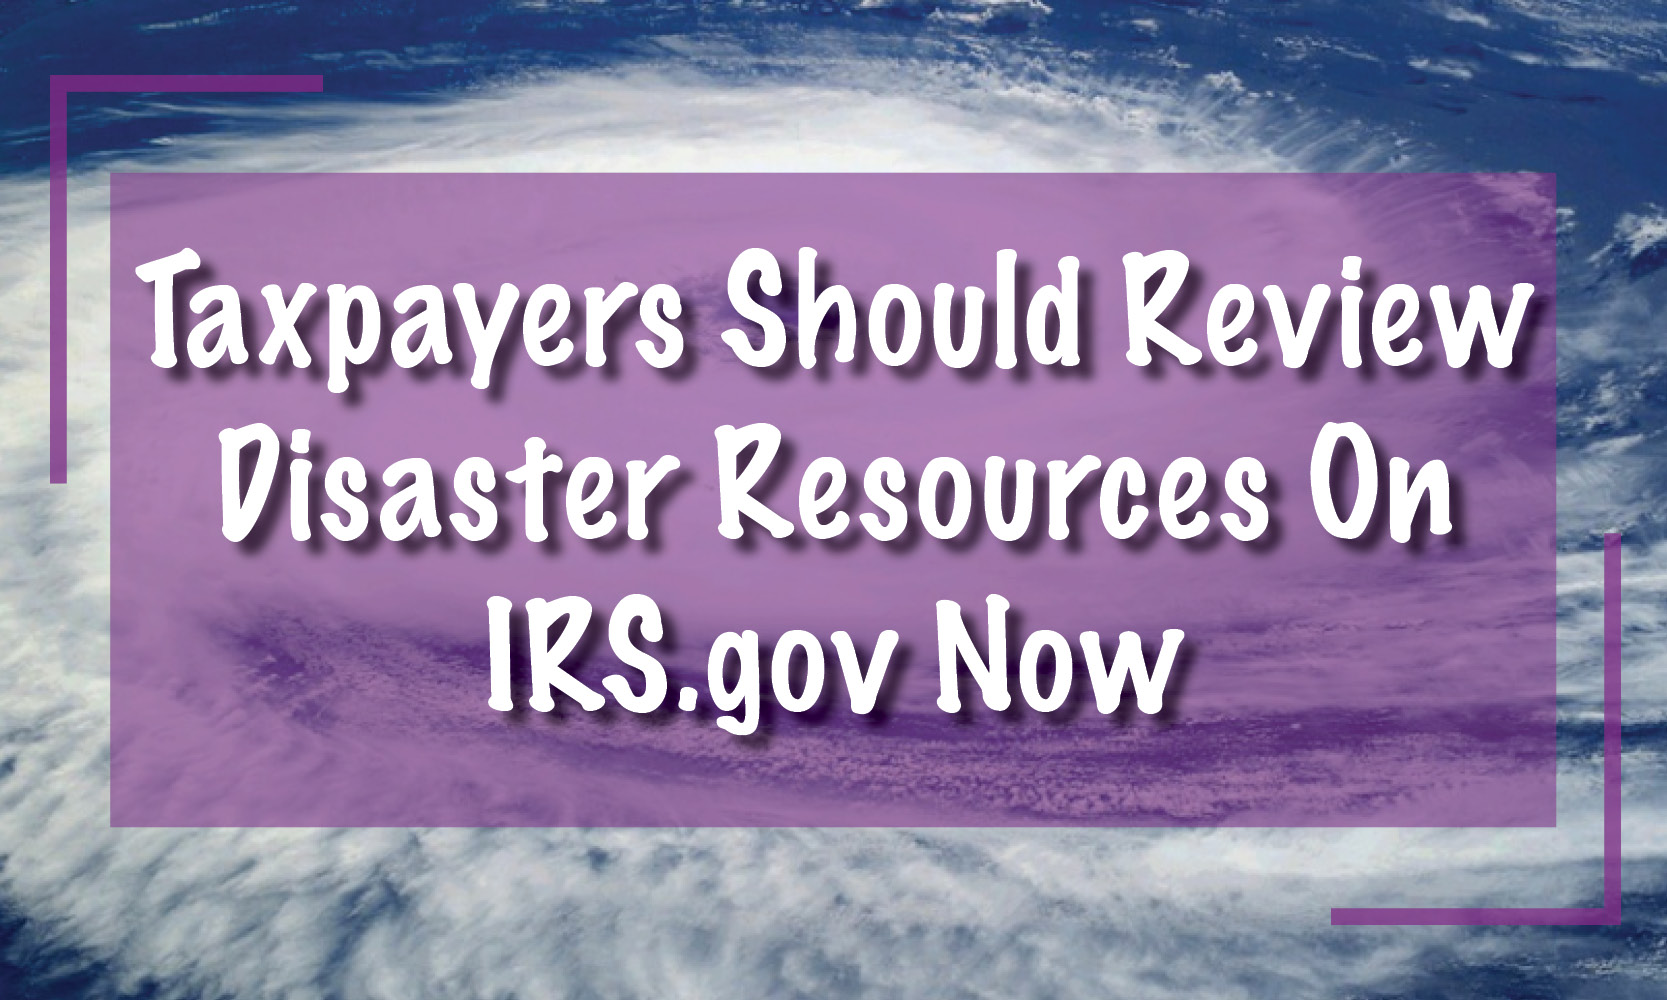 review disaster resources on IRS.gov now in case they need help later